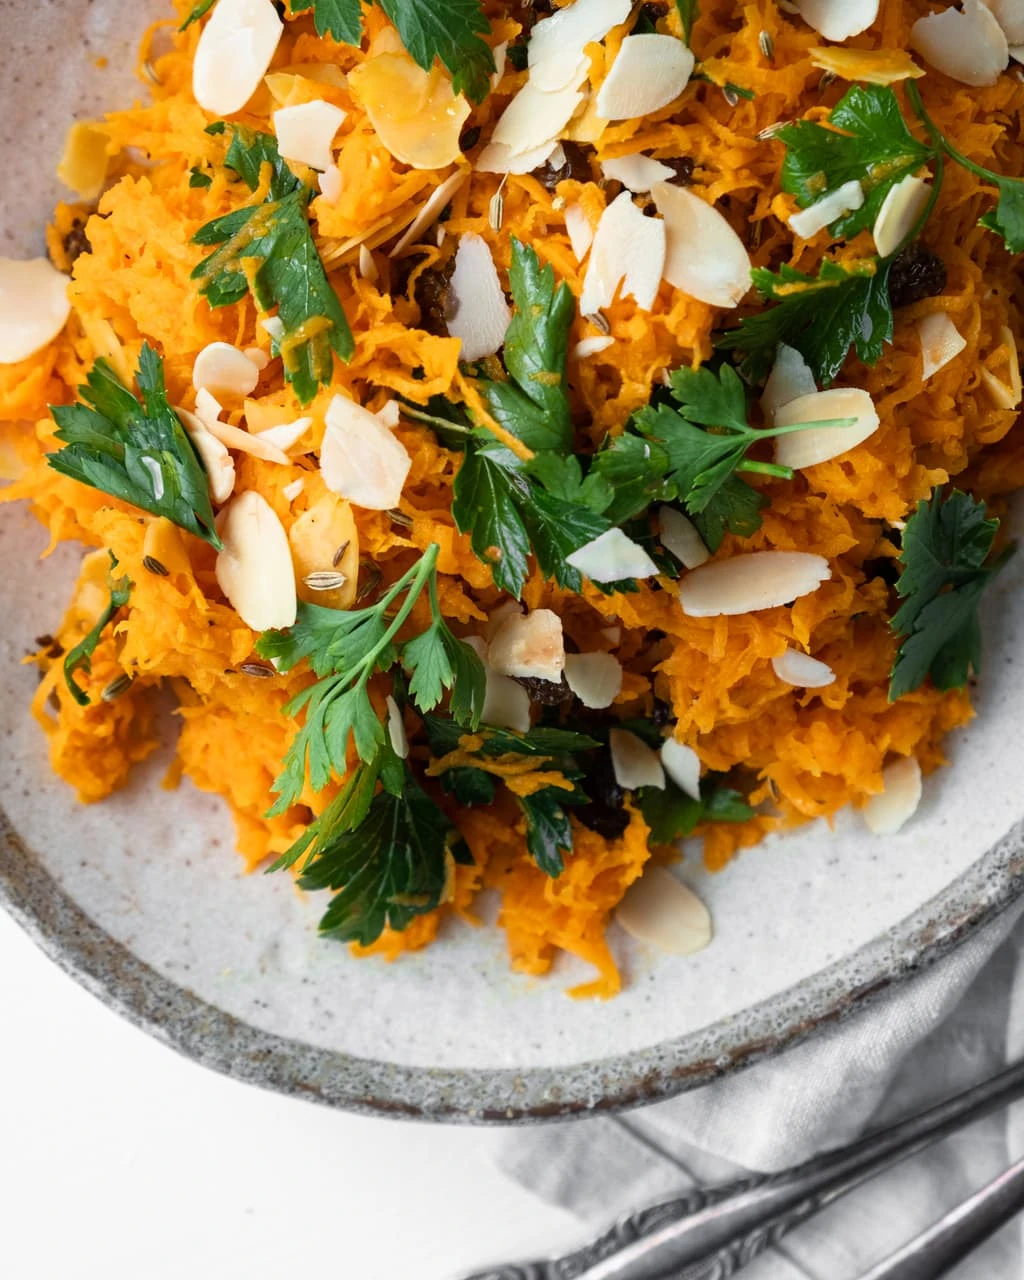 carrot salad from above